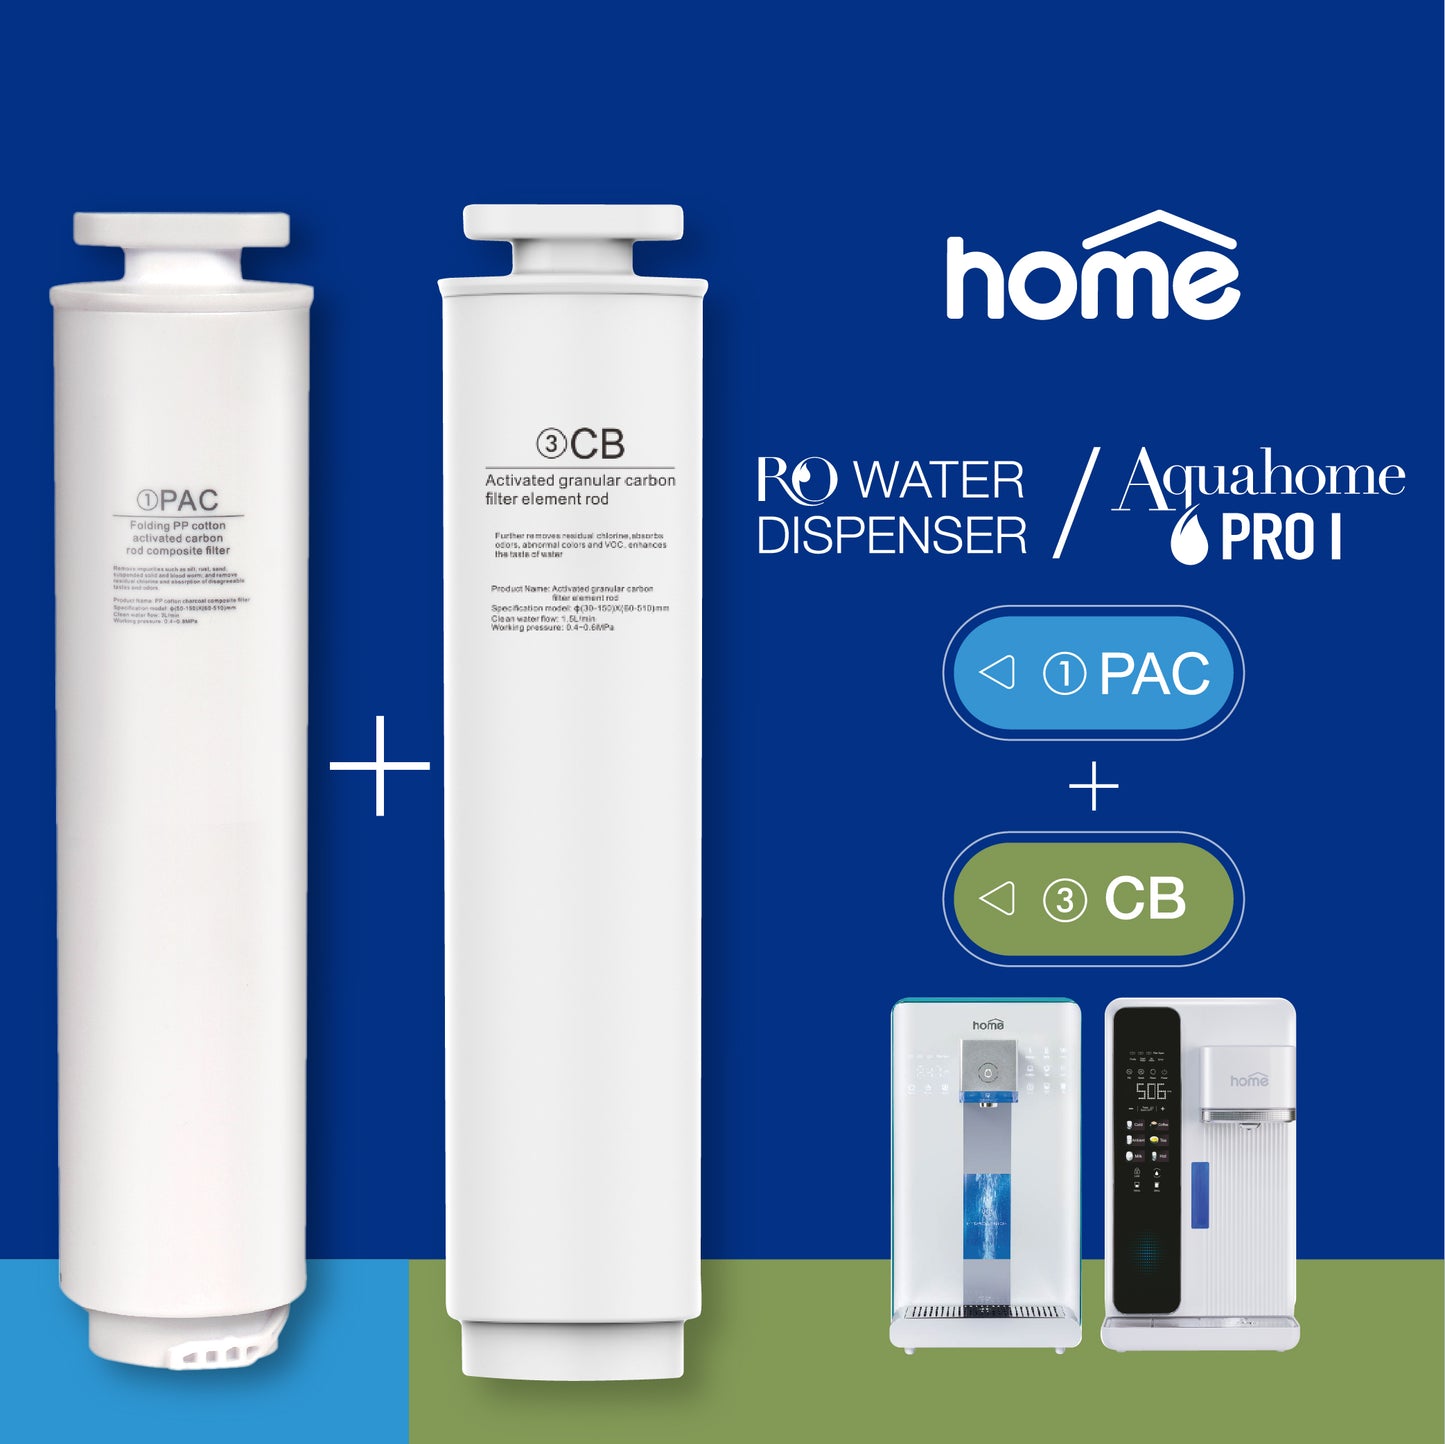 DM Home/Aquahome Pro1 Package - PAC + CB Filter (Applicable to the specific model)